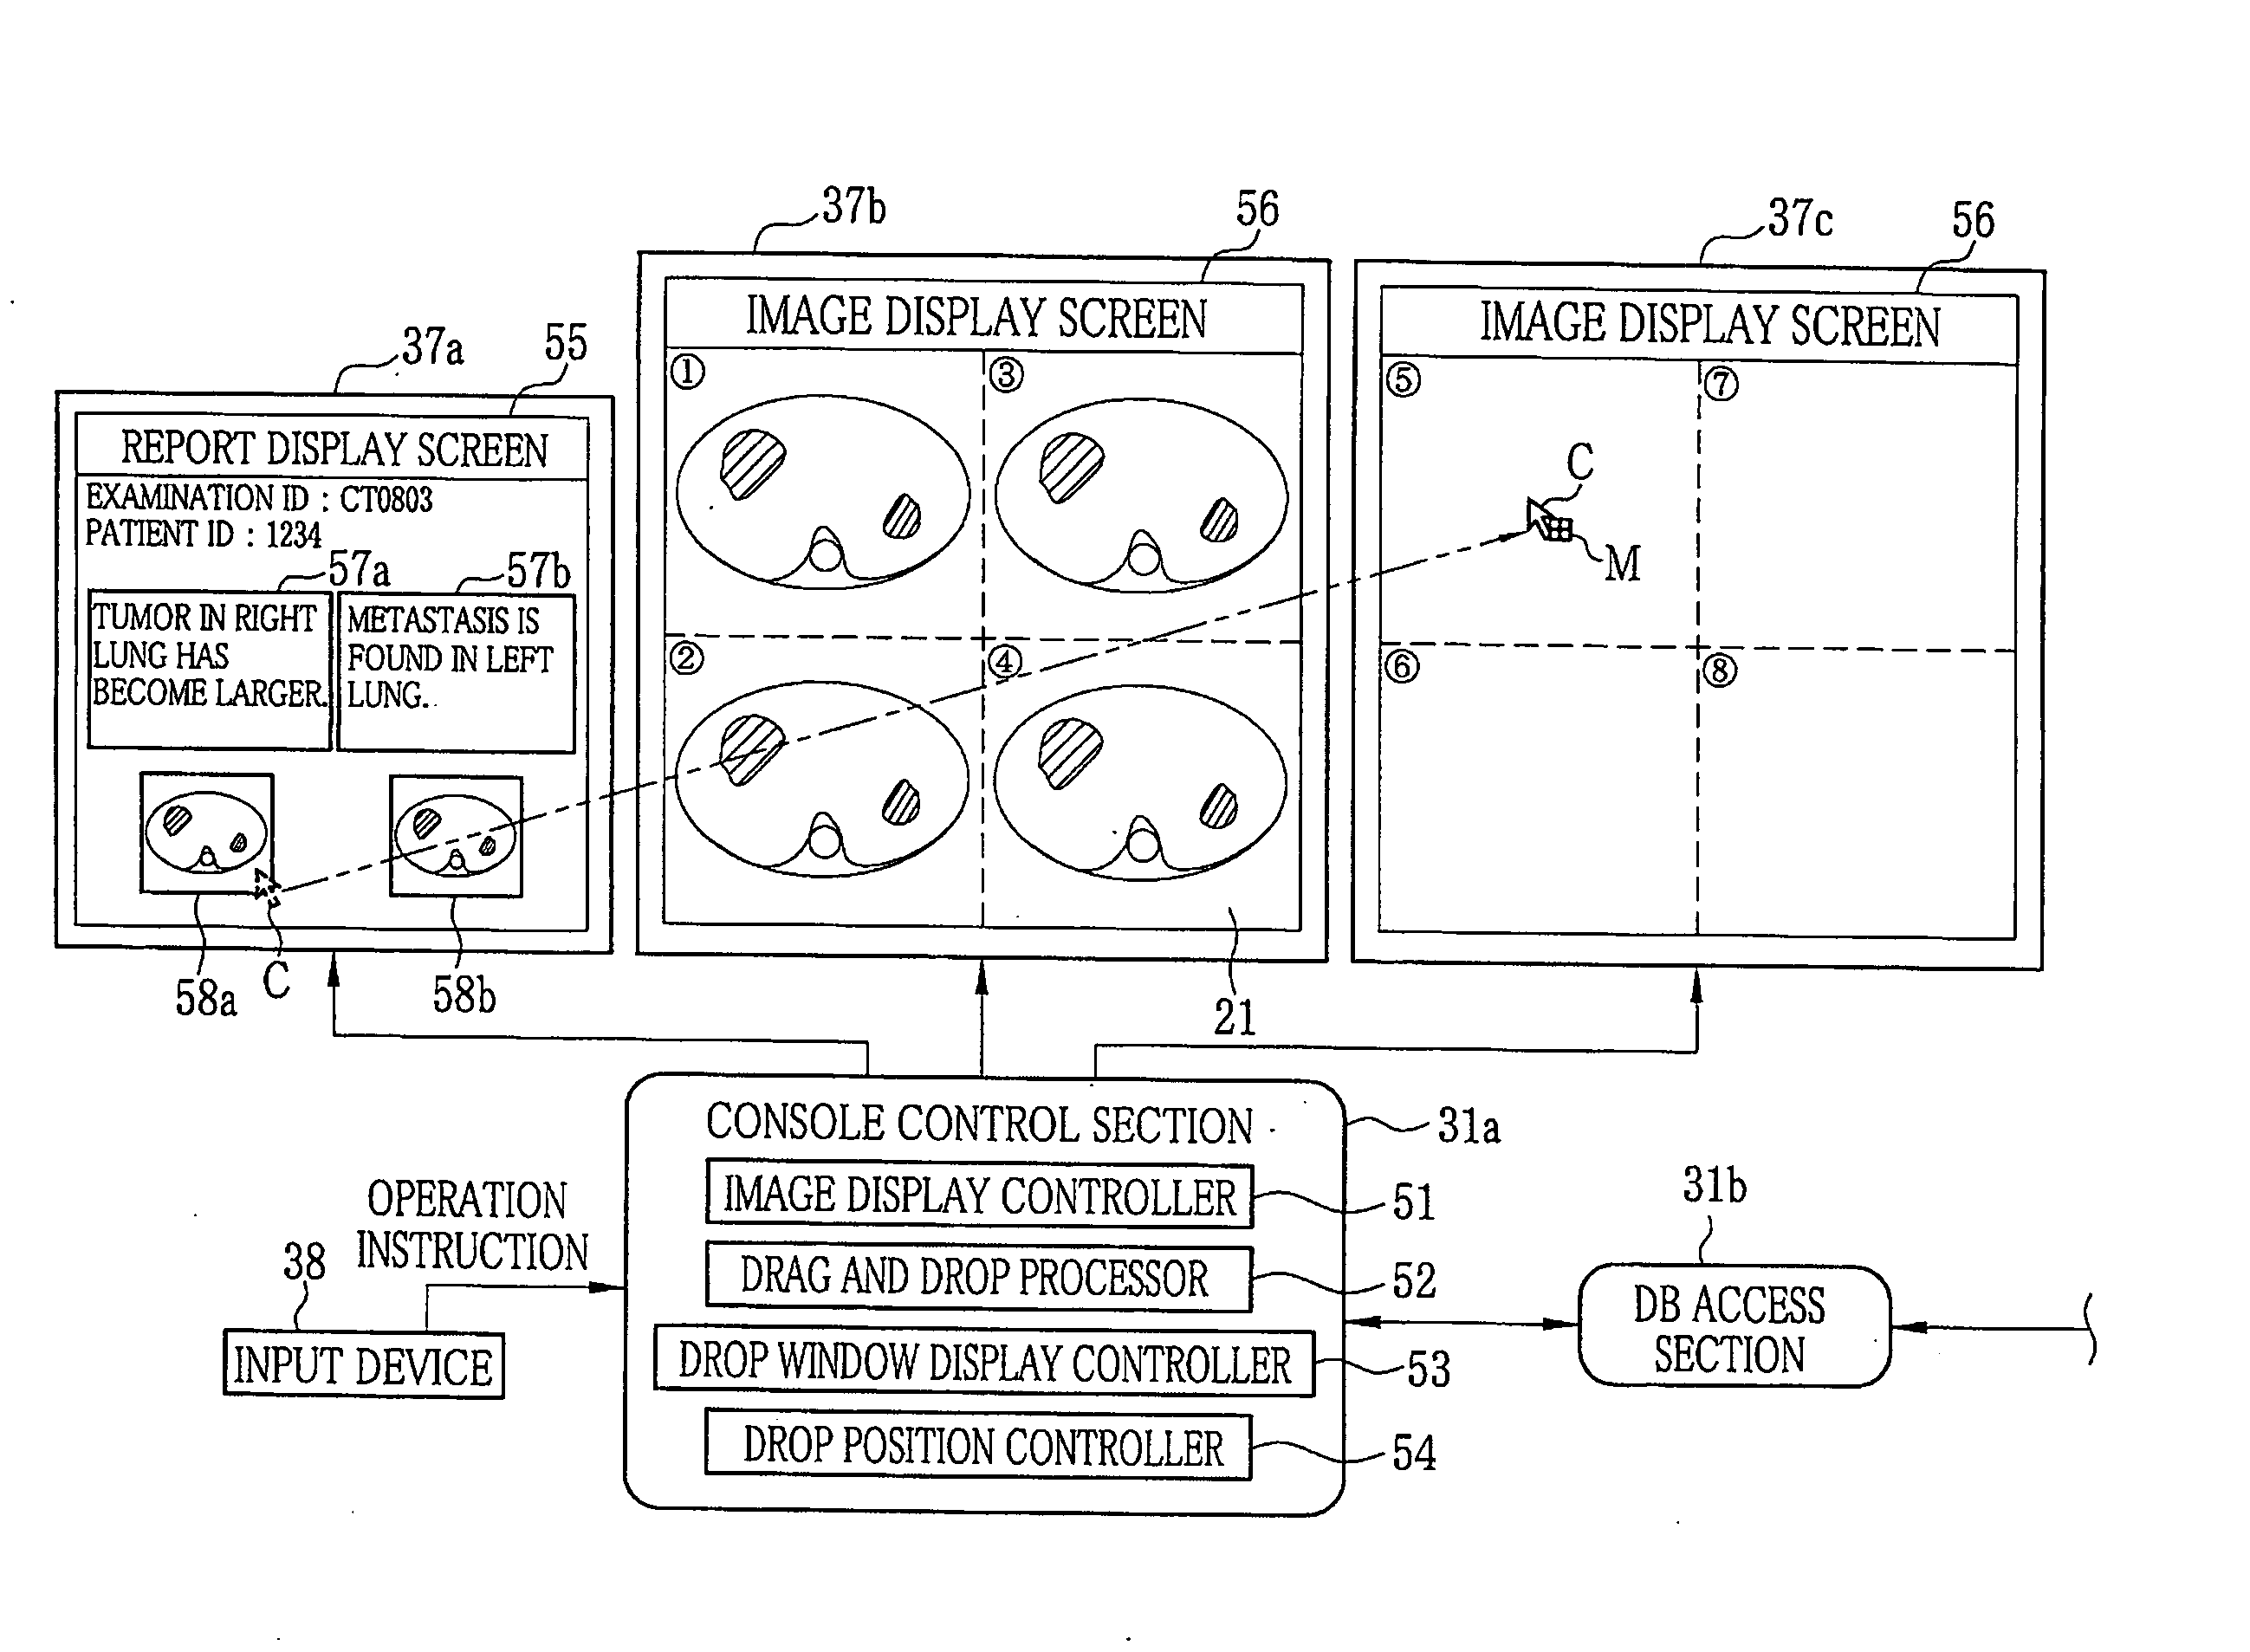 Apparatus, method and program for controlling drag and drop operation and computer terminal